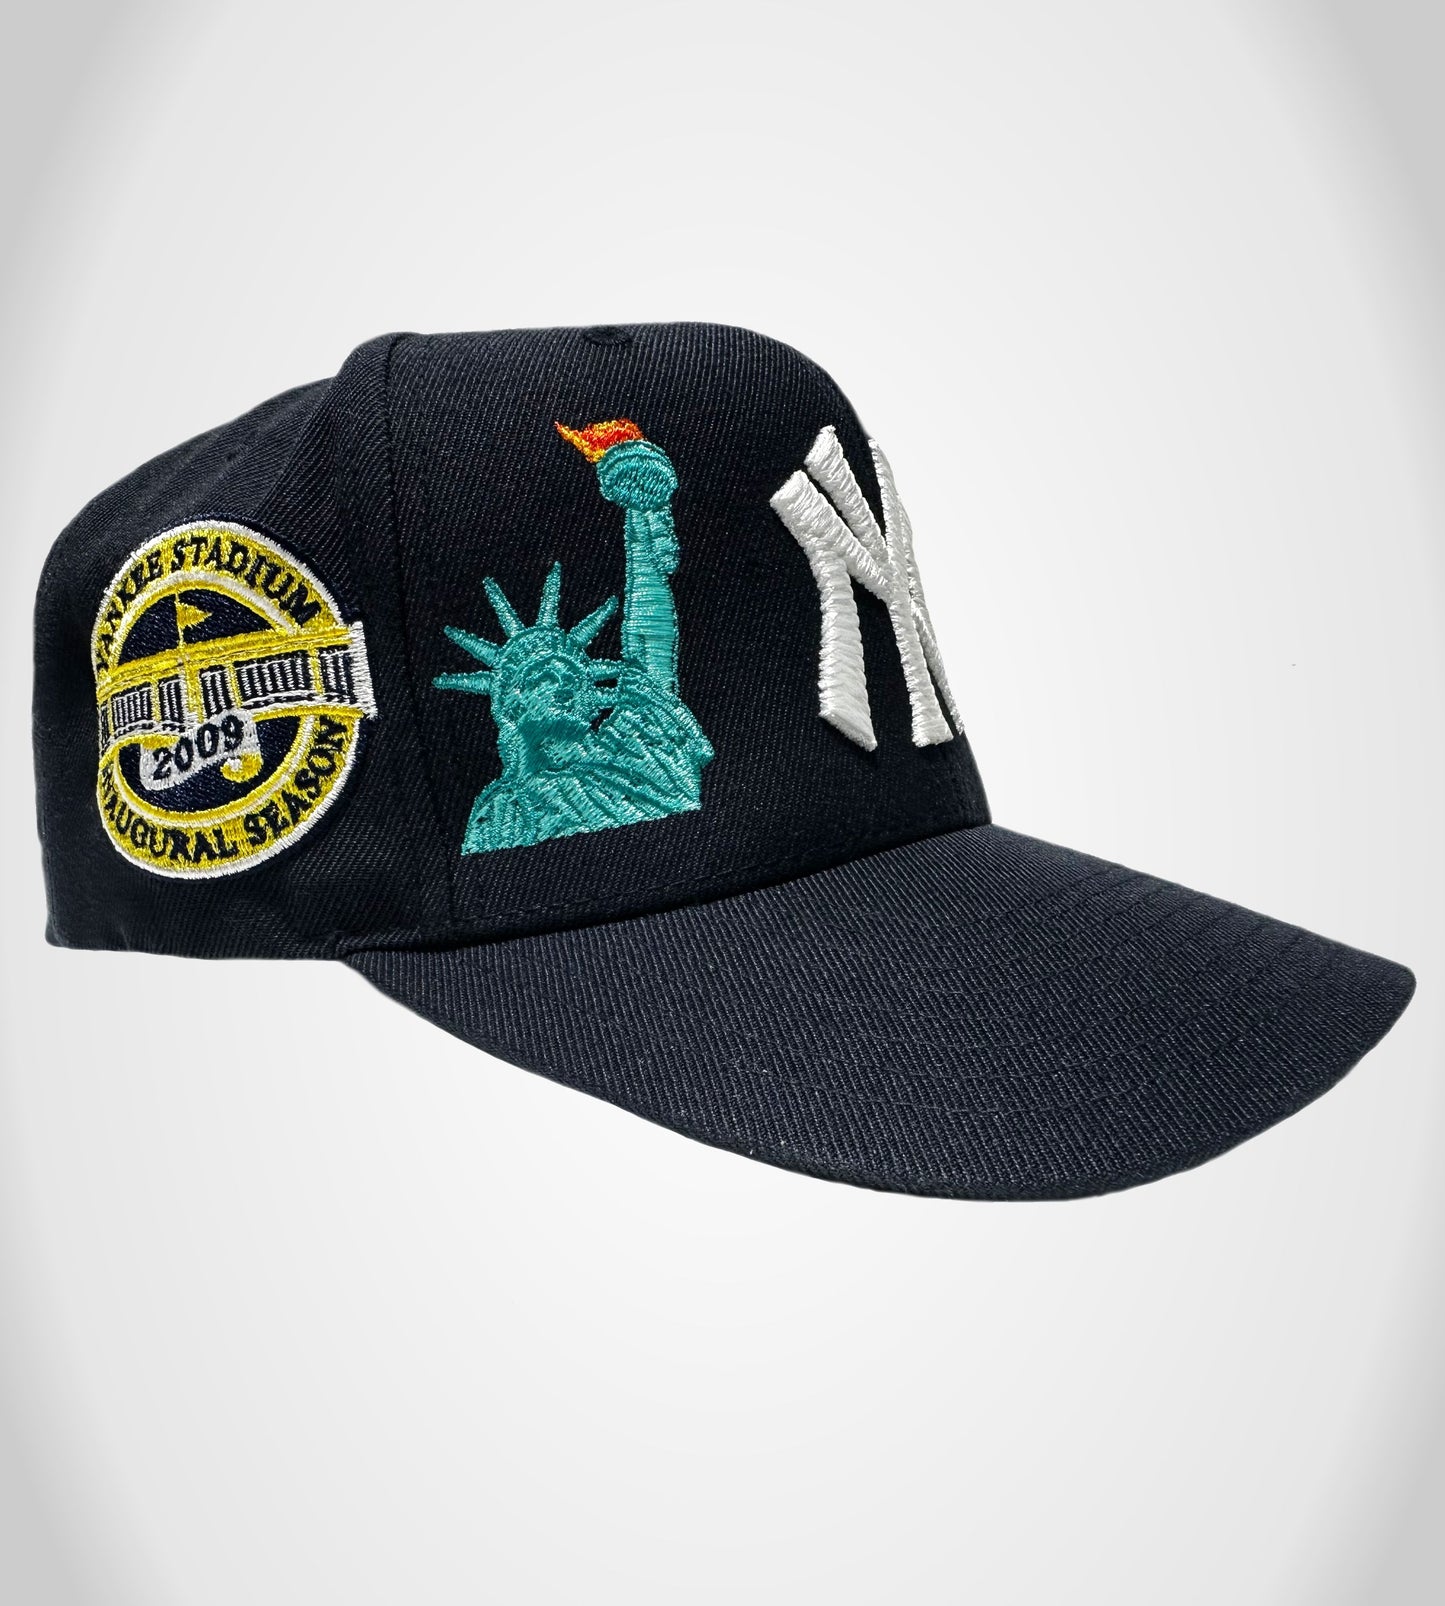 .NY Yankees Hats Special (Limited Edition)